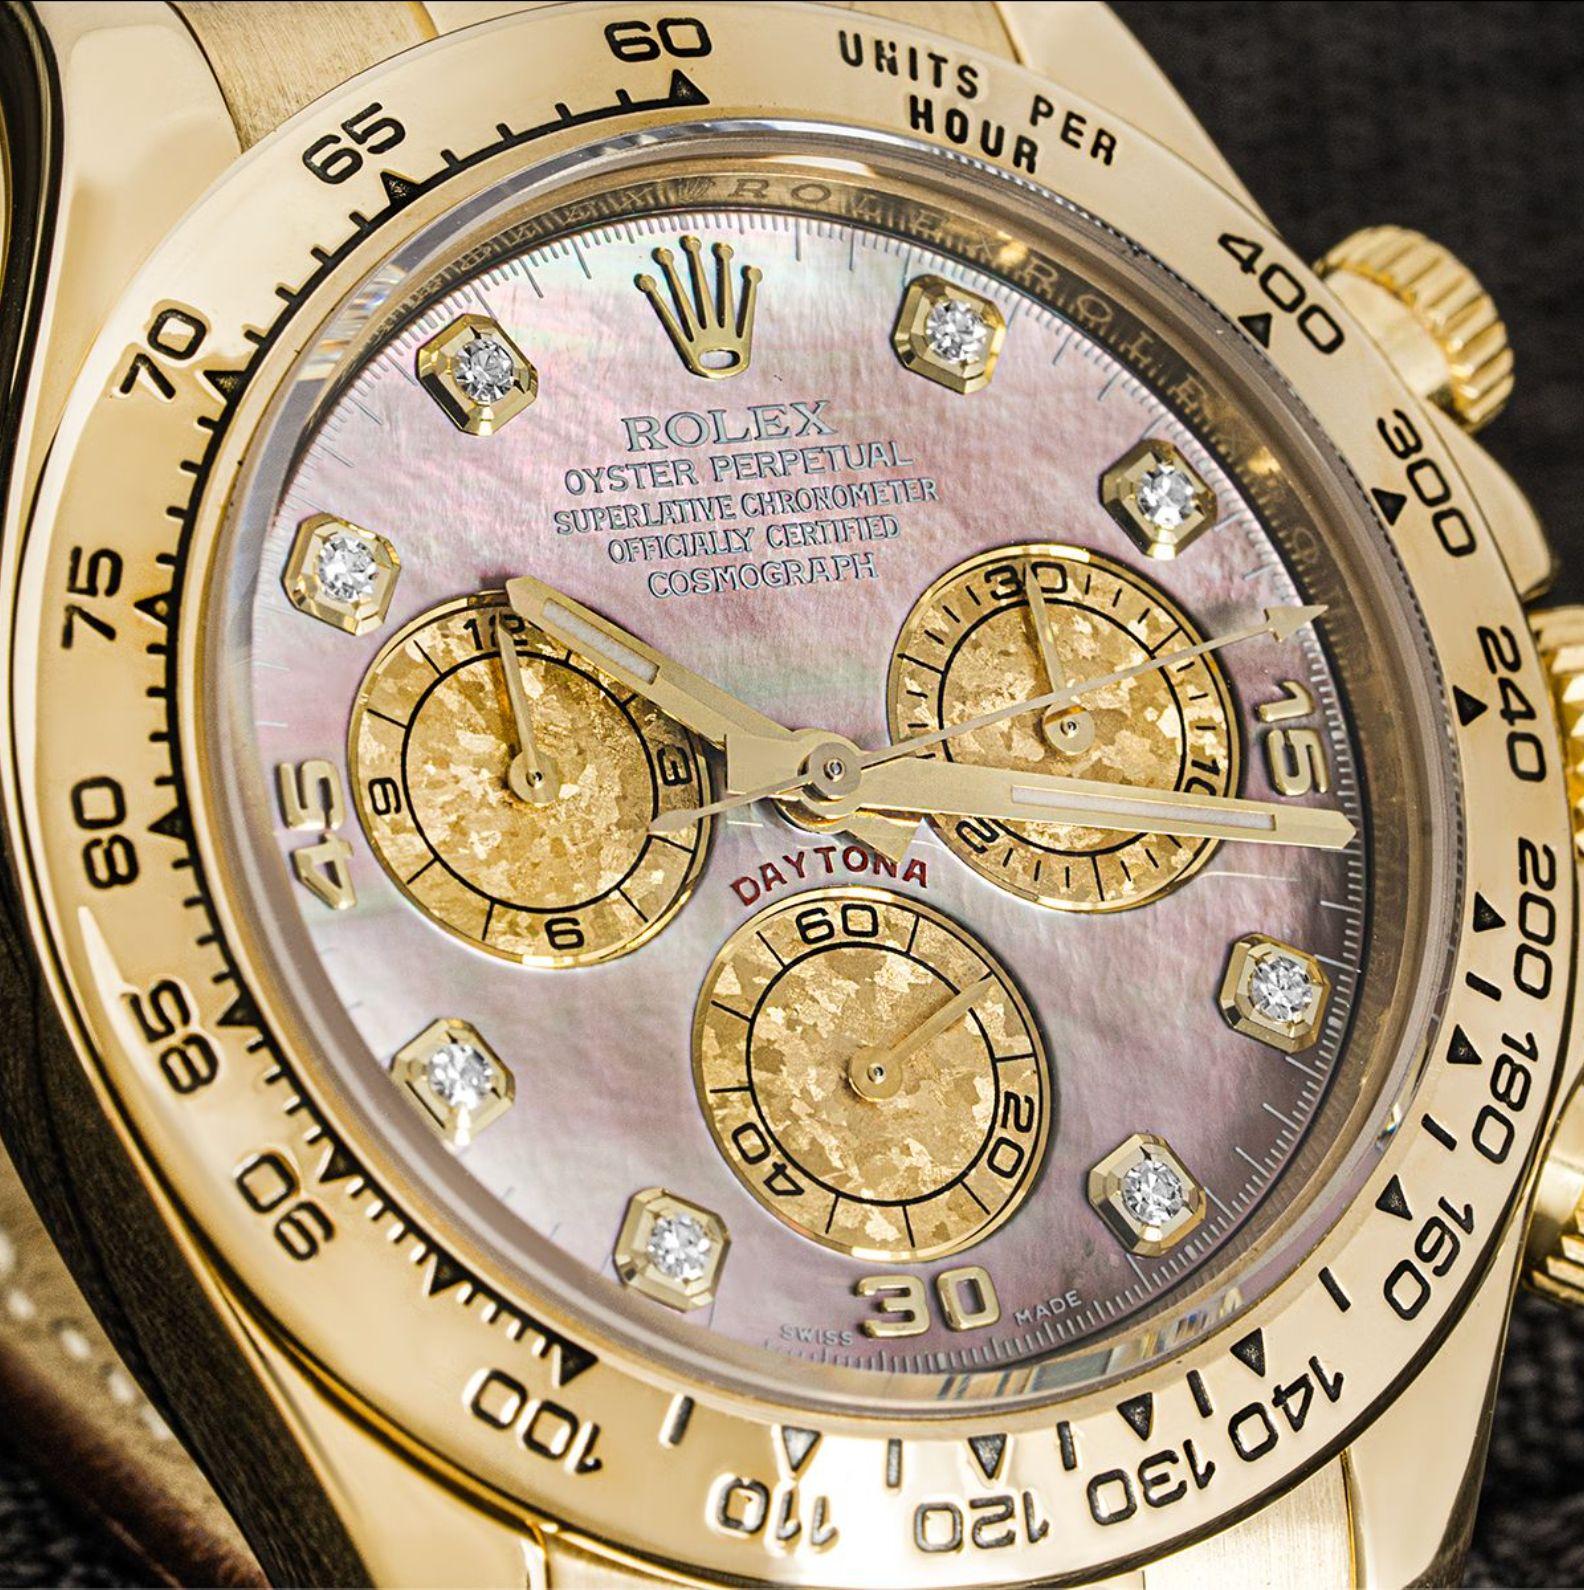 A mens yellow gold Cosmograph Daytona by Rolex. Featuring a stunning Tahitian mother of pearl dial with diamond set hour markers and a yellow gold bezel set with a tachymetric scale.

Fitted with a scratch-resistant sapphire crystal and self-winding